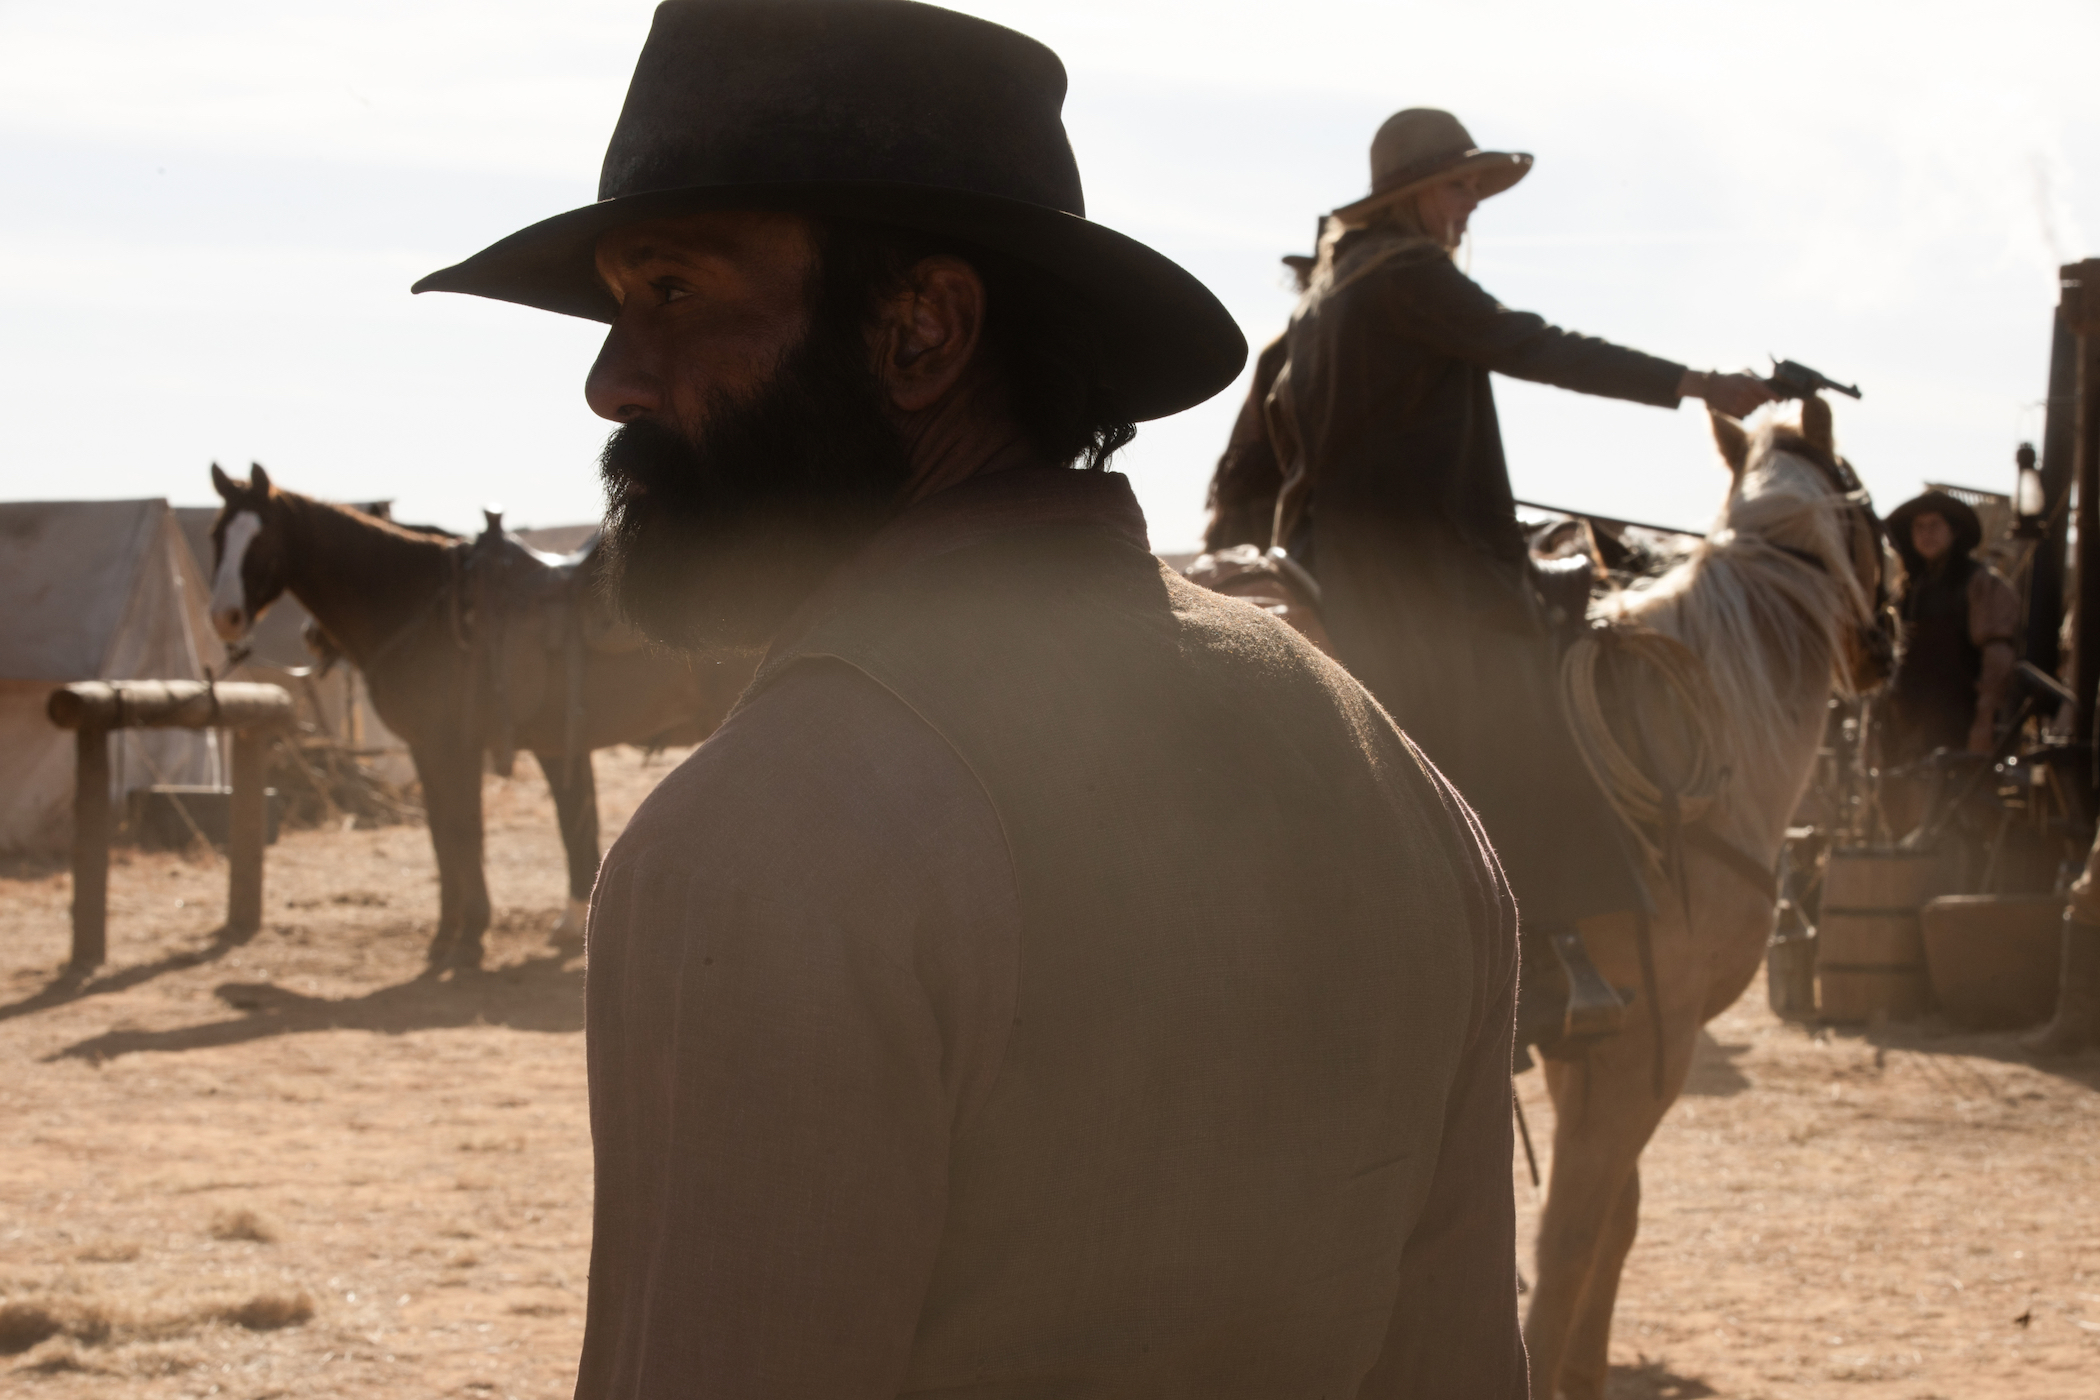 A close-up of Tim McGraw as James Dutton in '1883' with horses and people on the horses behind him